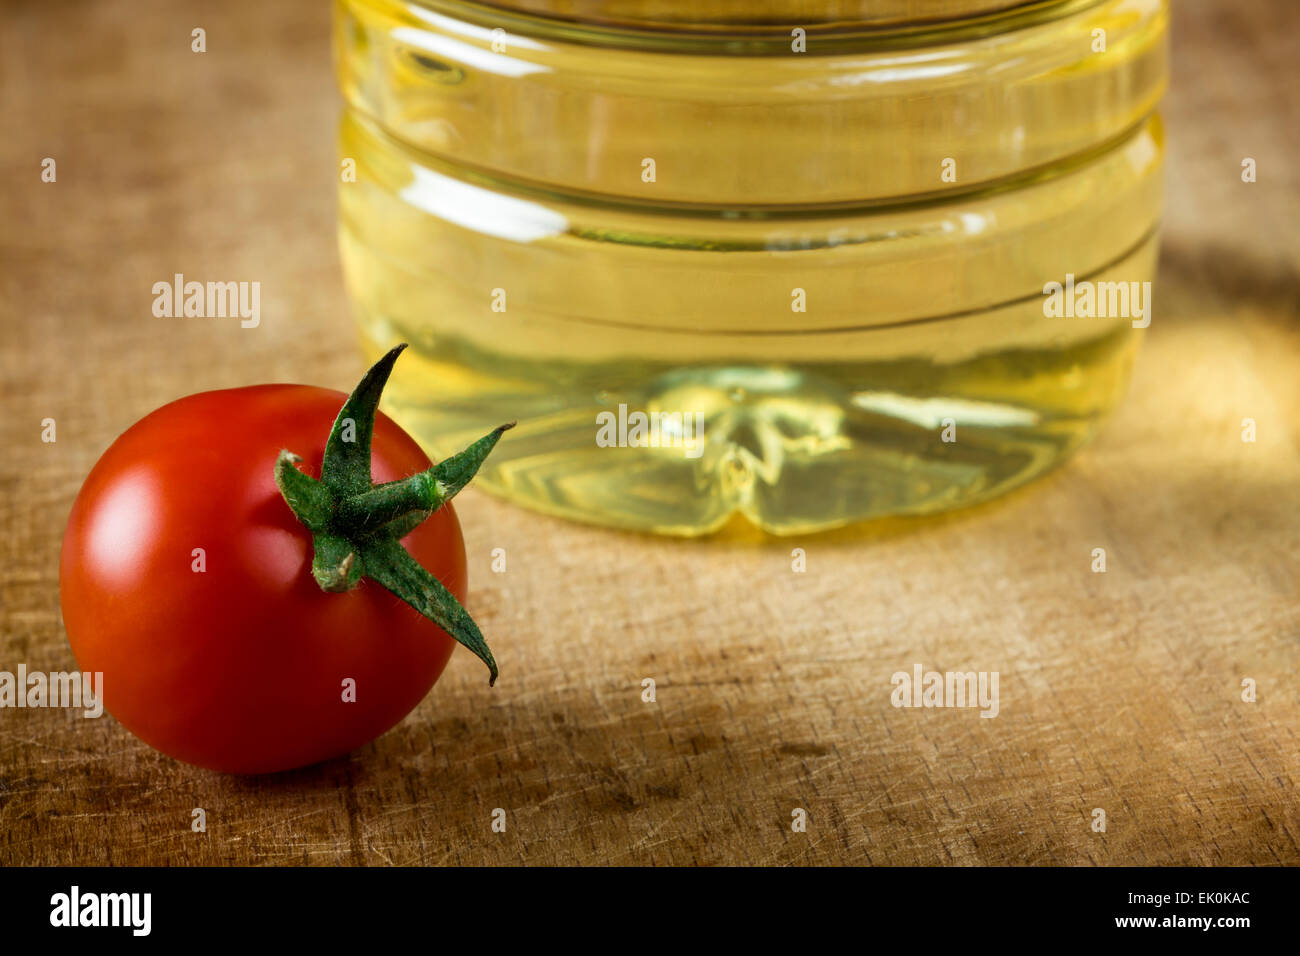 One red cherry tomato and oil on wood background surface Stock Photo